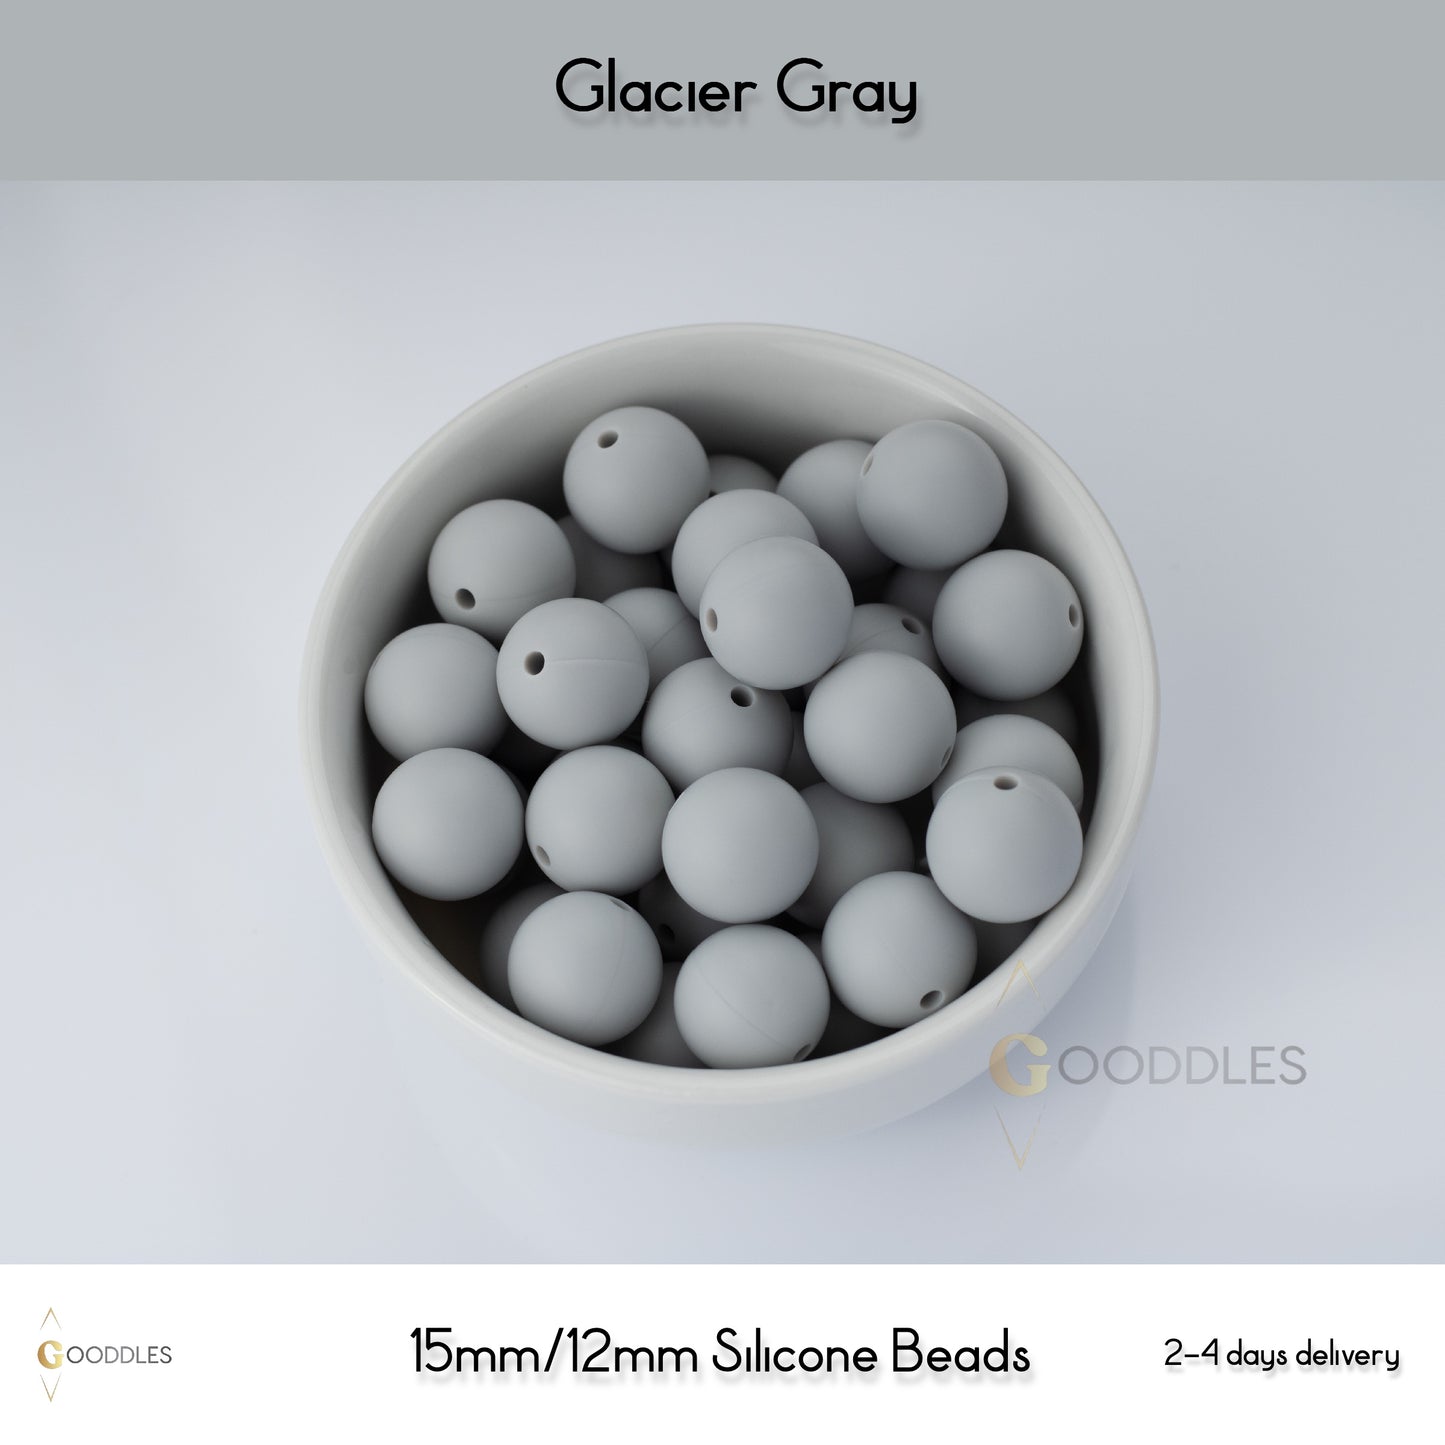 5pcs, Glacier Gray Silicone Beads Round Silicone Beads